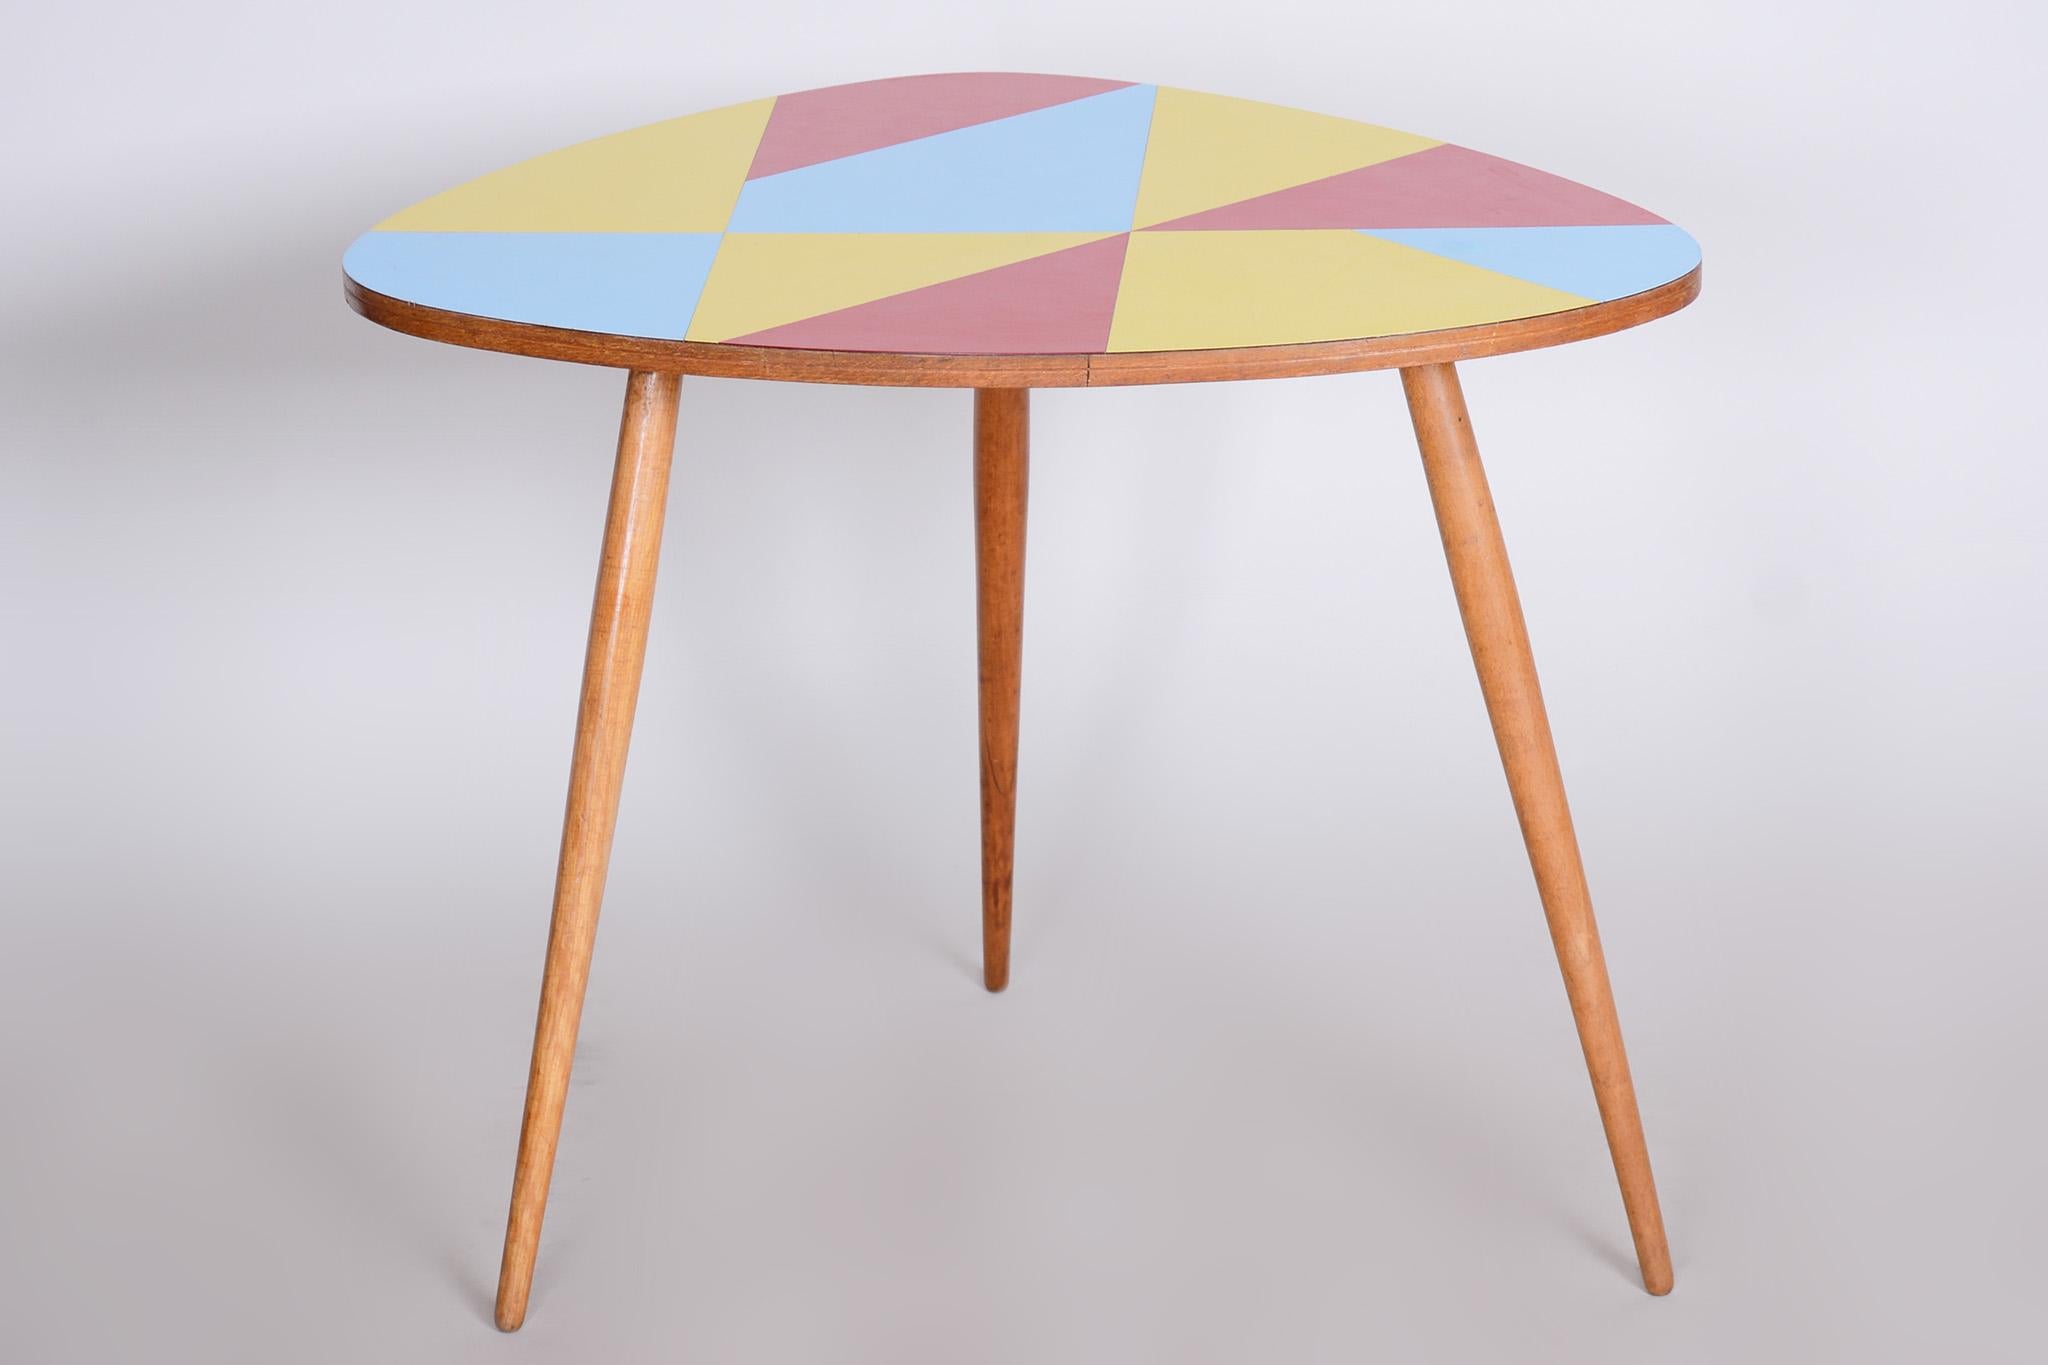 Formica Small Mid Century Table, Made in Czechia, 1950s, Original Condition